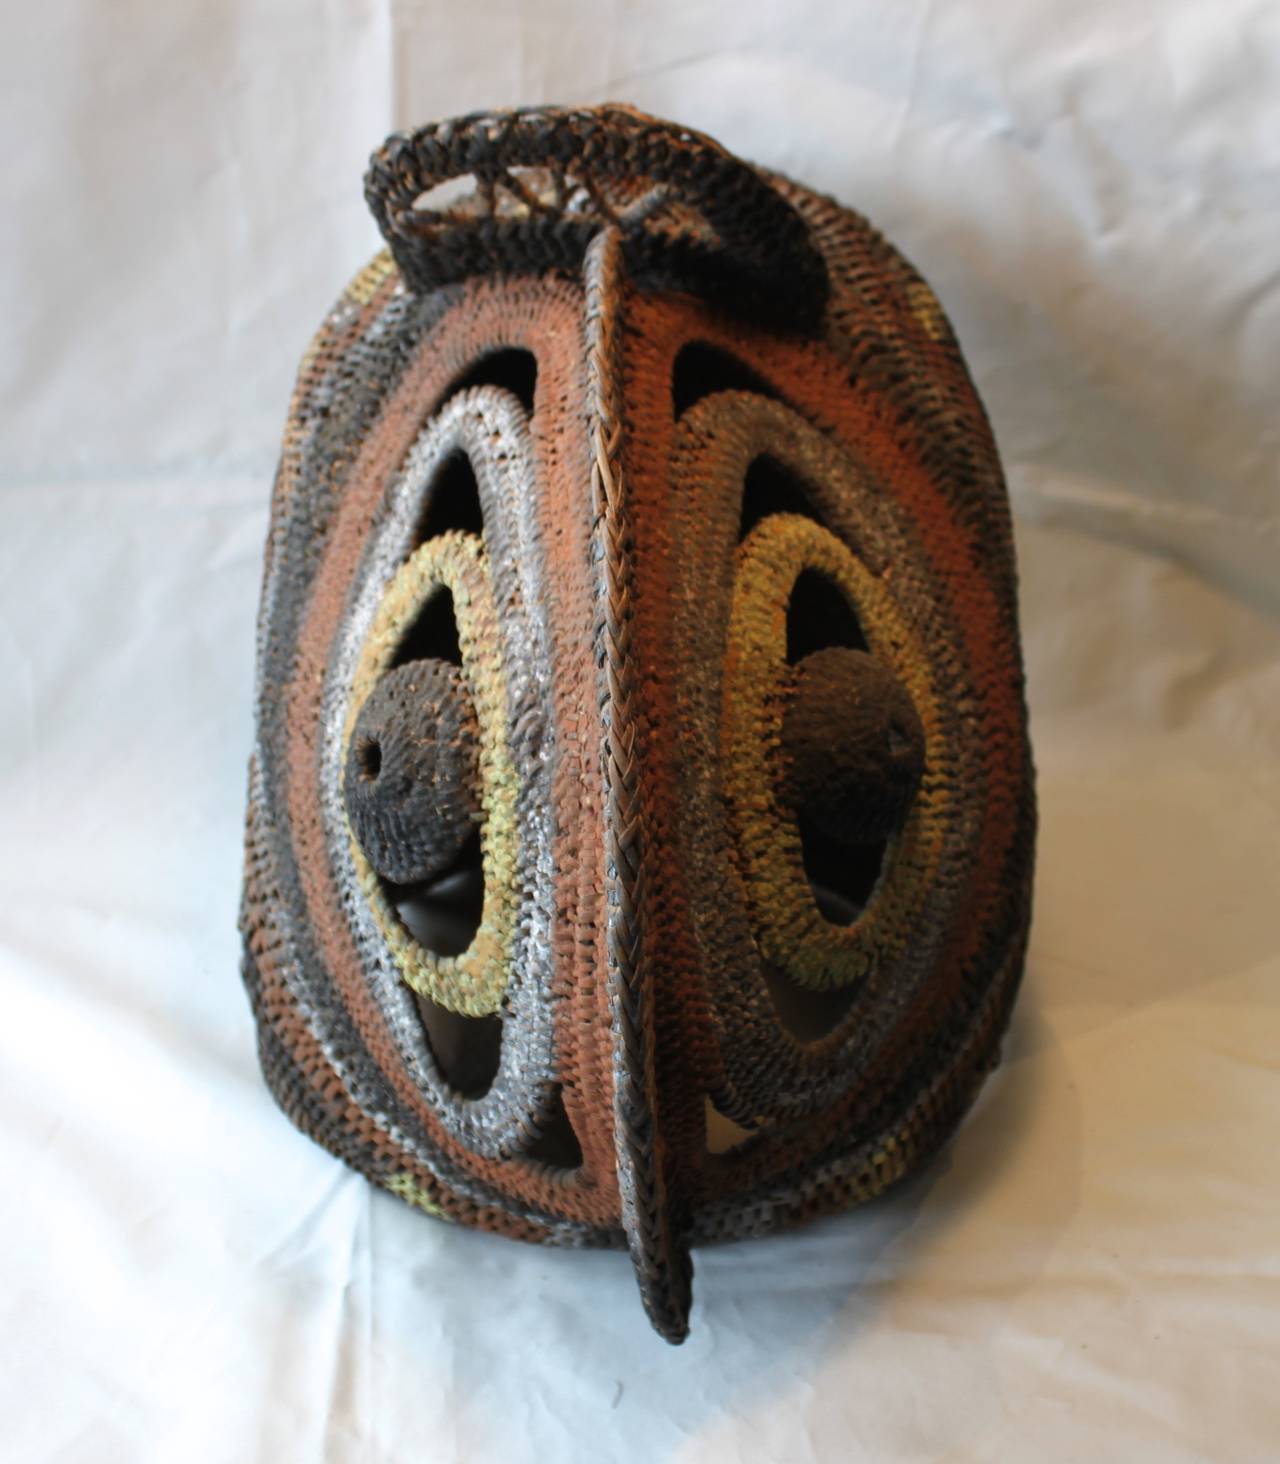 Papua New Guinea Helmut Mask, early 20th century
Vars Collection, New Haven, CT.